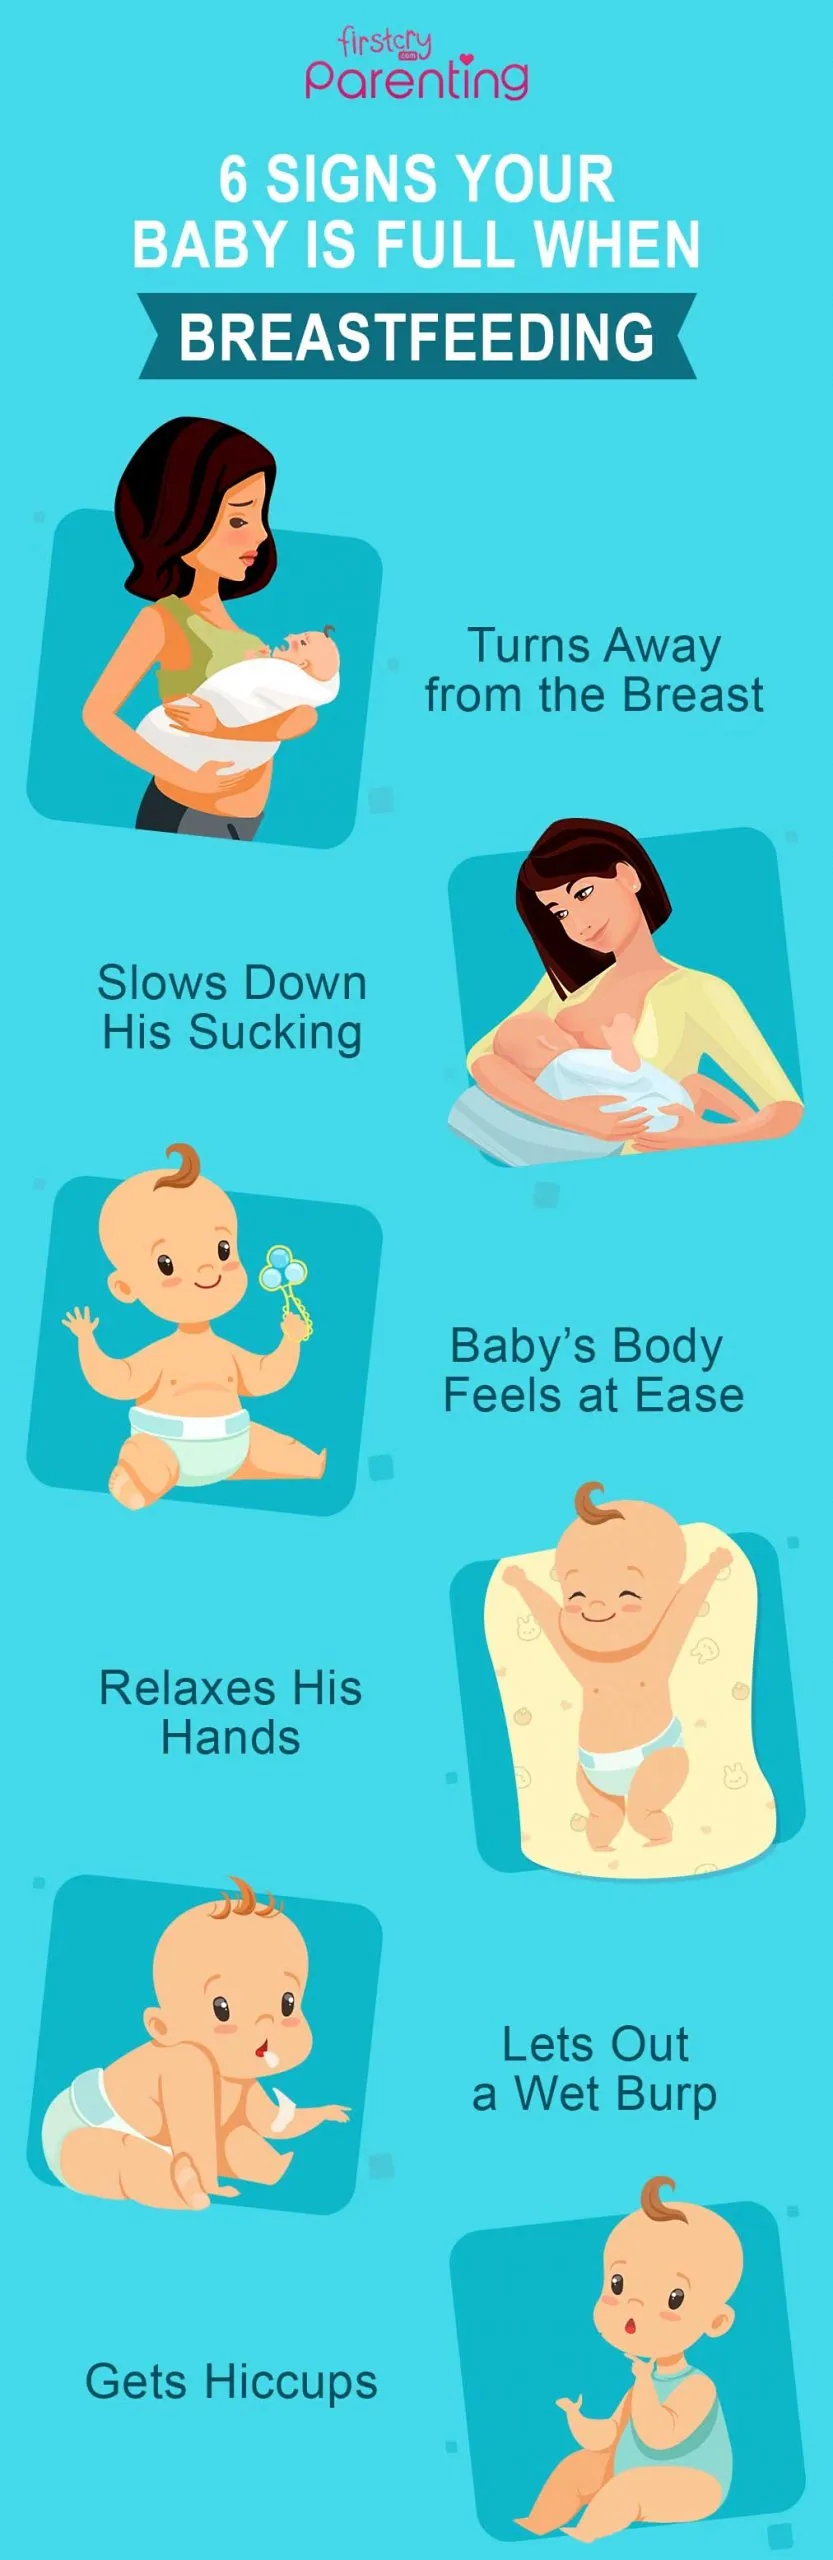 6 Signs Your Baby is Full While Breastfeeding